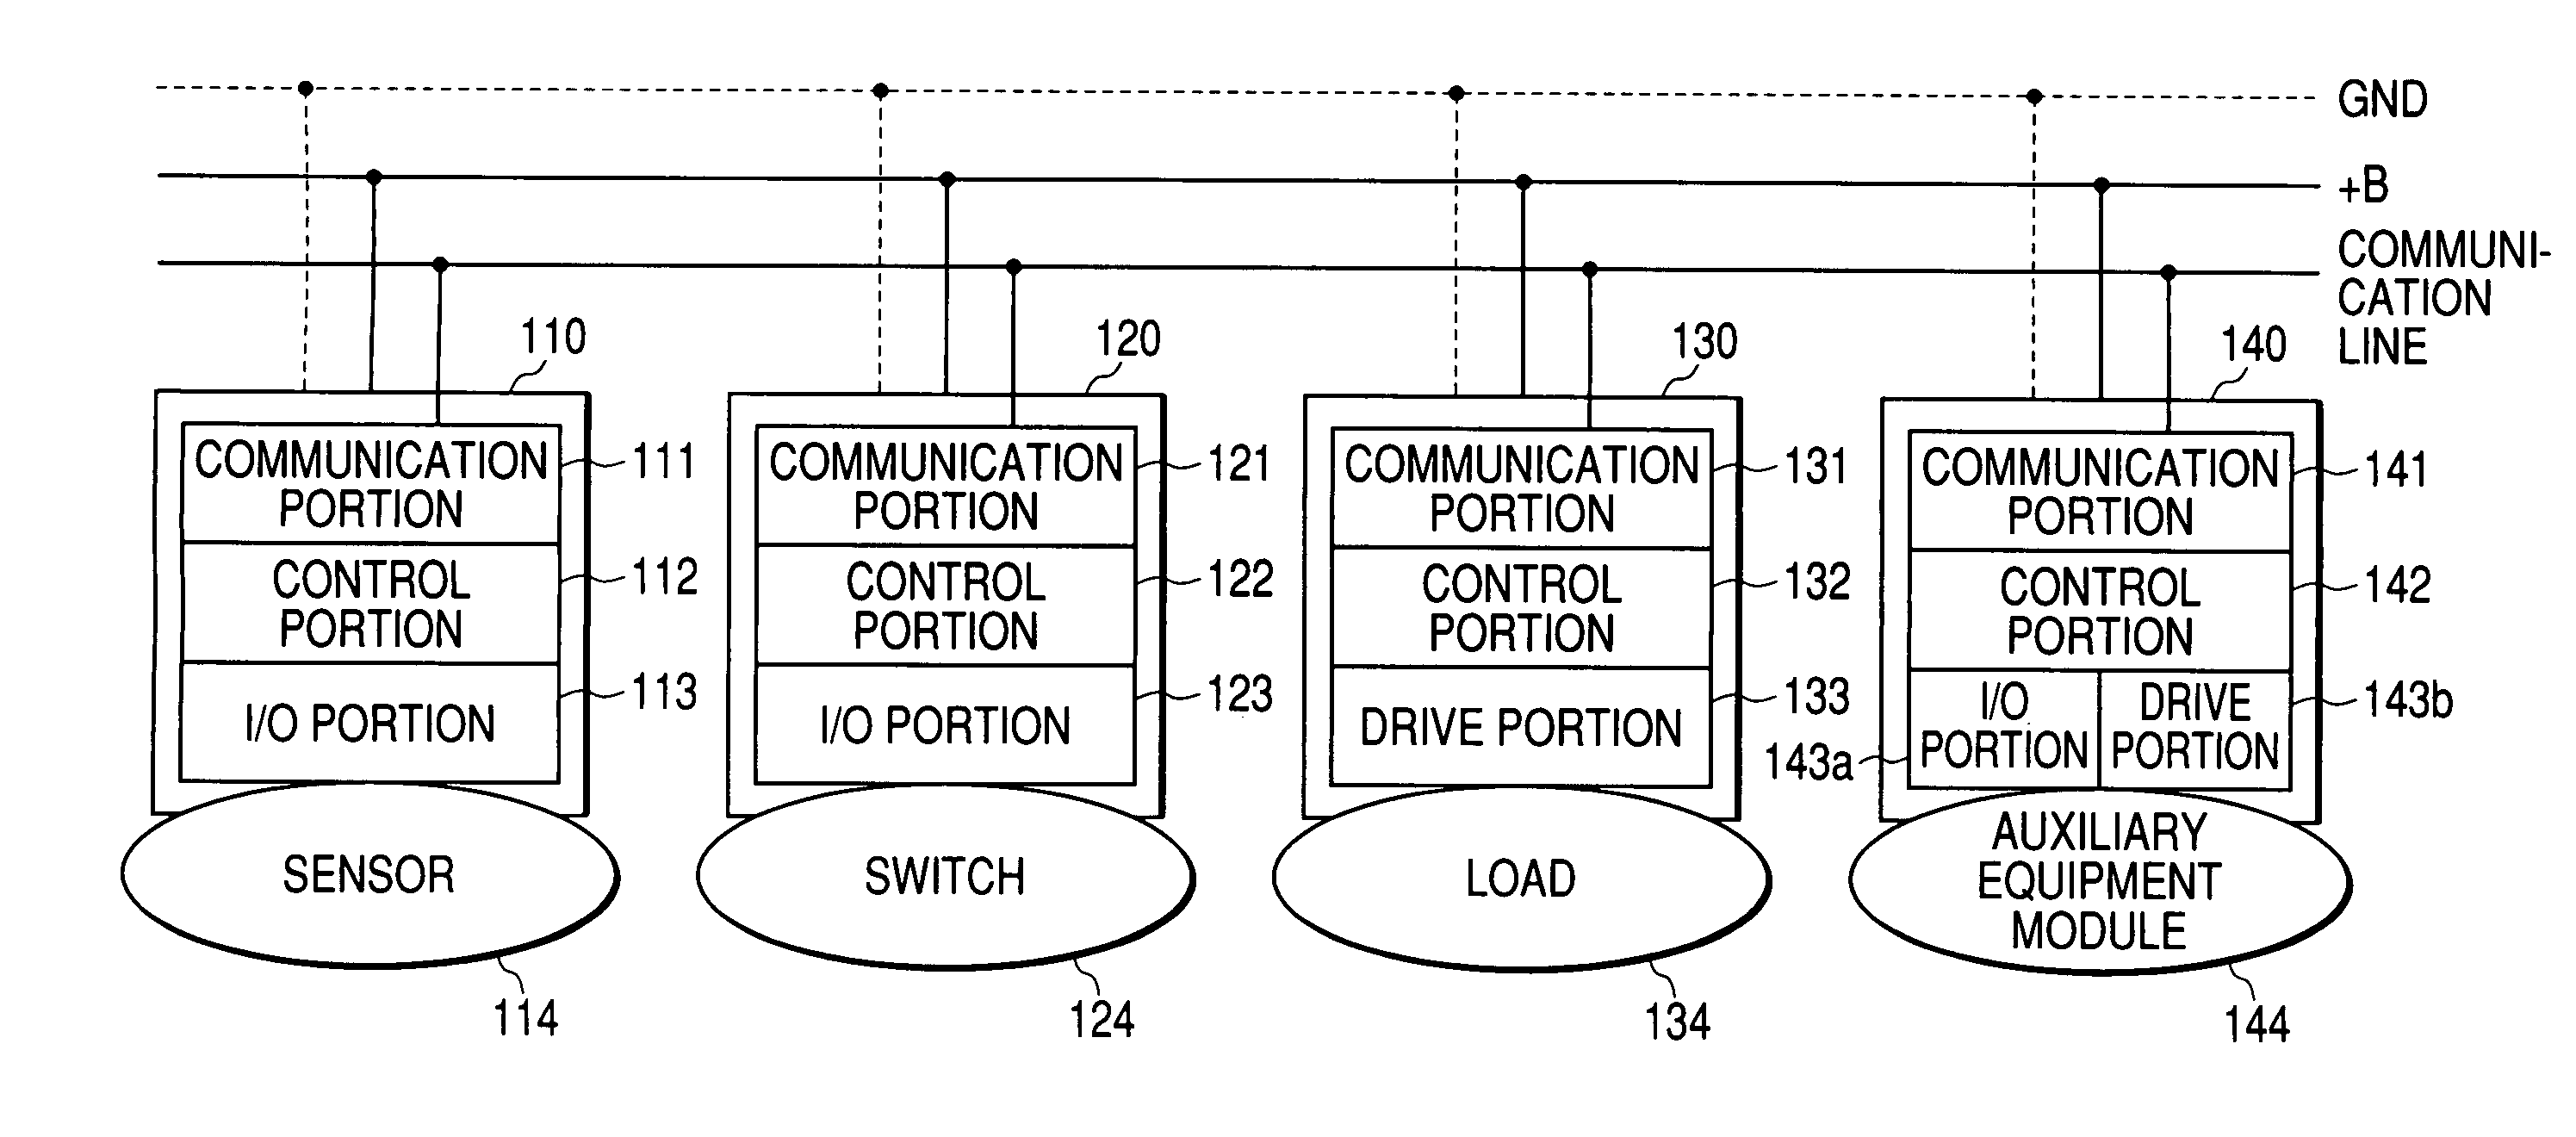 Method of communicating a signal from a sensor, connected to a connector, to an auxiliary module